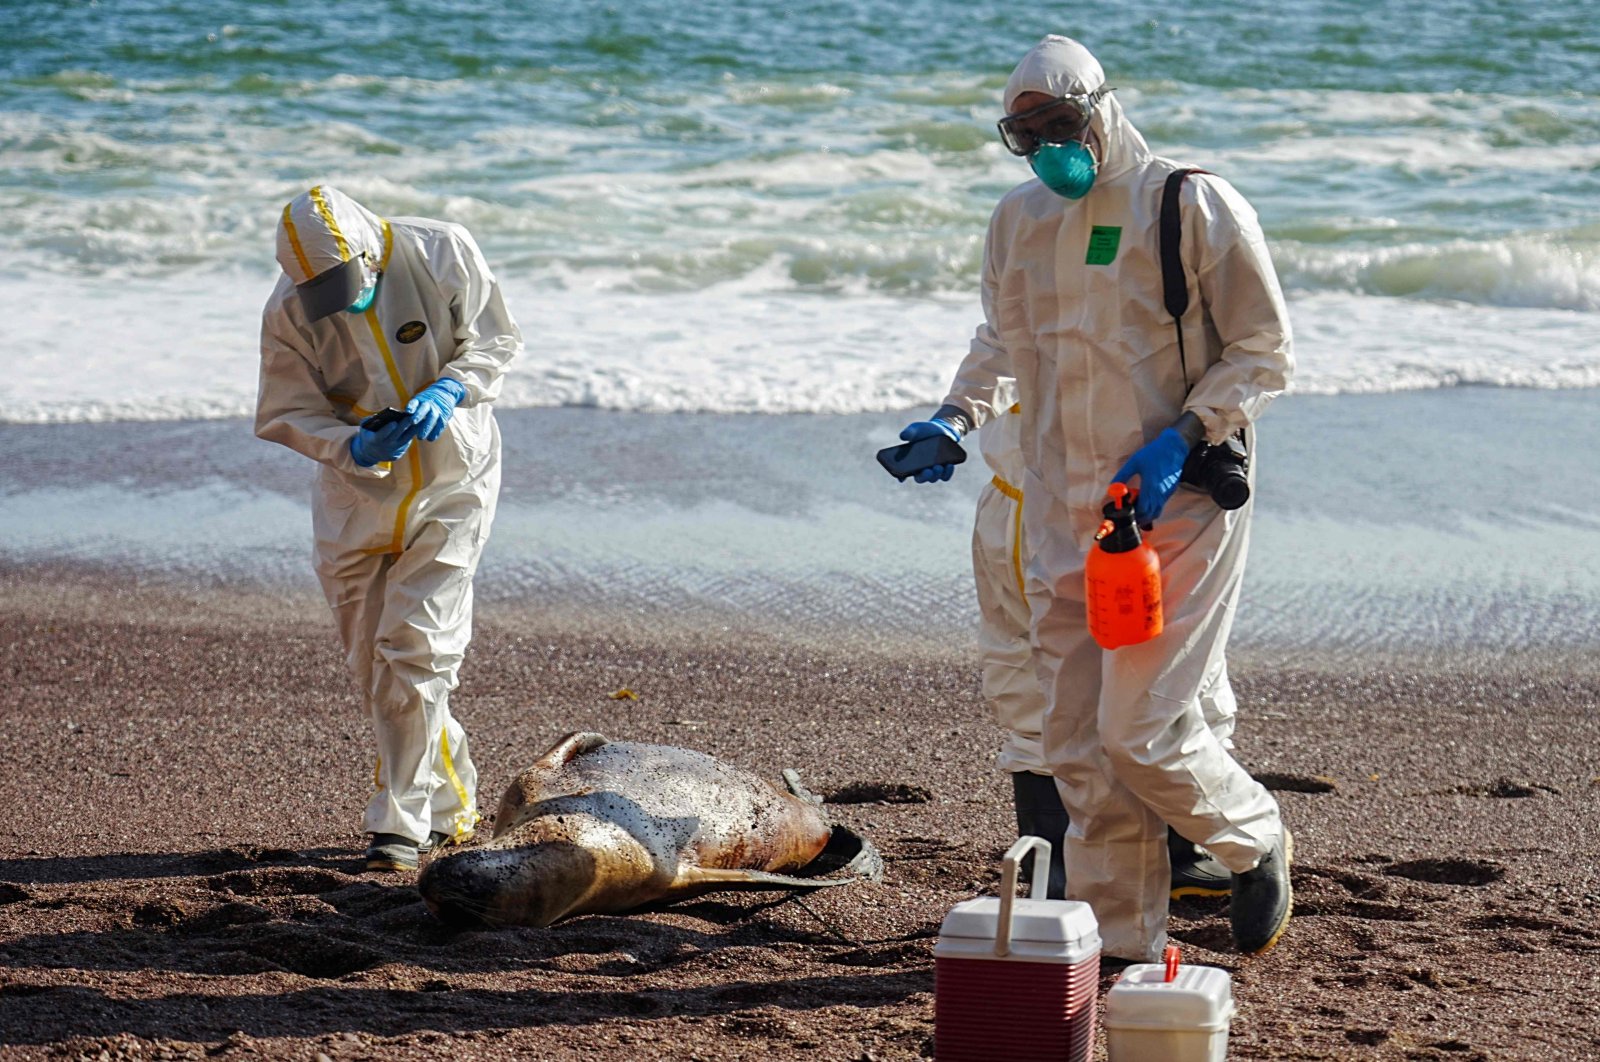 Medics analyze the remains of dead sea lions washed ashore in the Paracas National Reserve, in Peru, March 3, 2023. (AFP Photo)